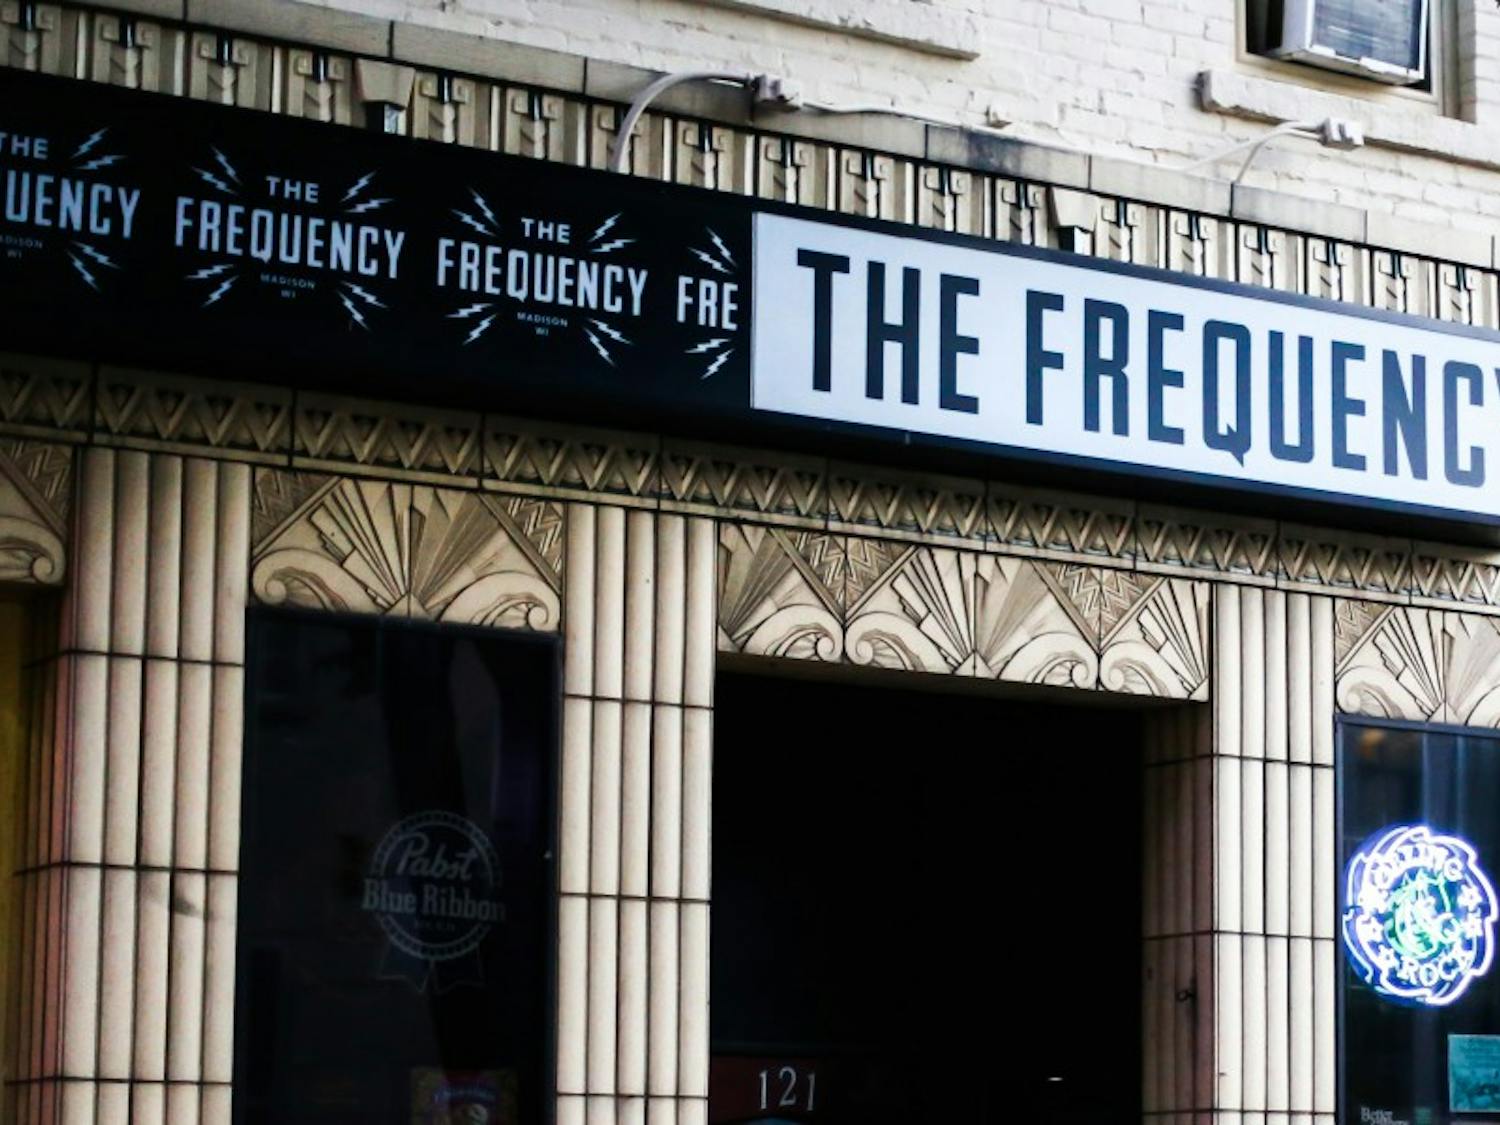 The Frequency, a music venue in downtown Madison, suspended hip-hop performances at its venue twice in three years.